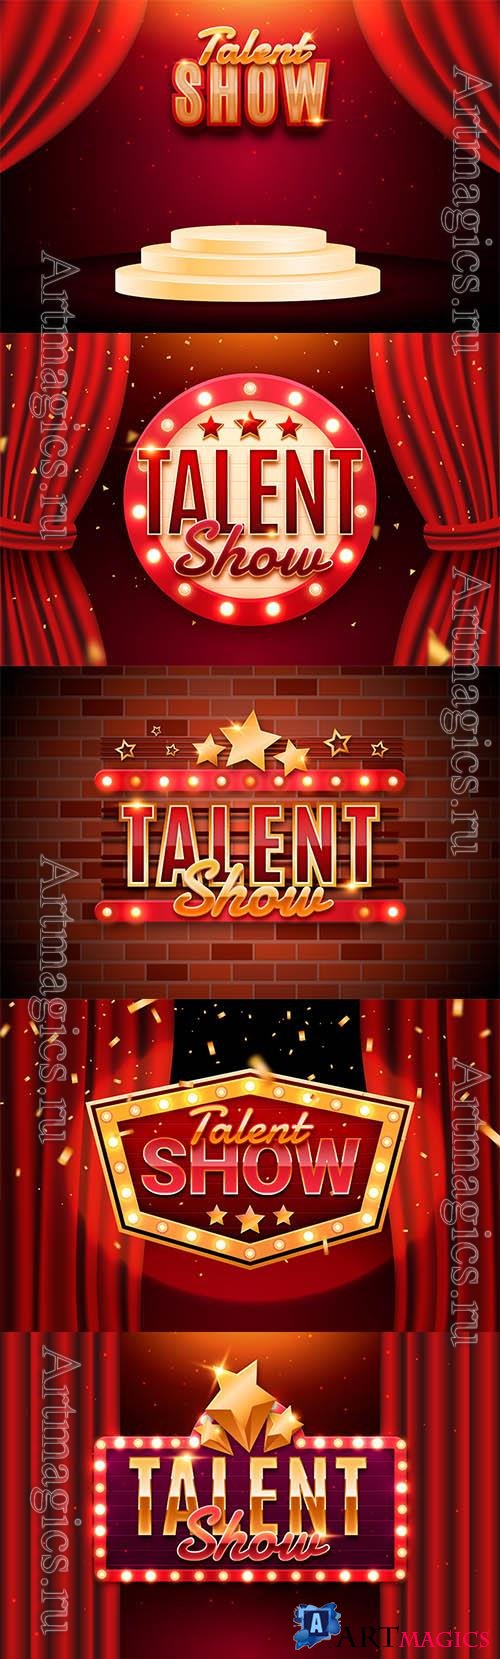 Vector realistic talent show background